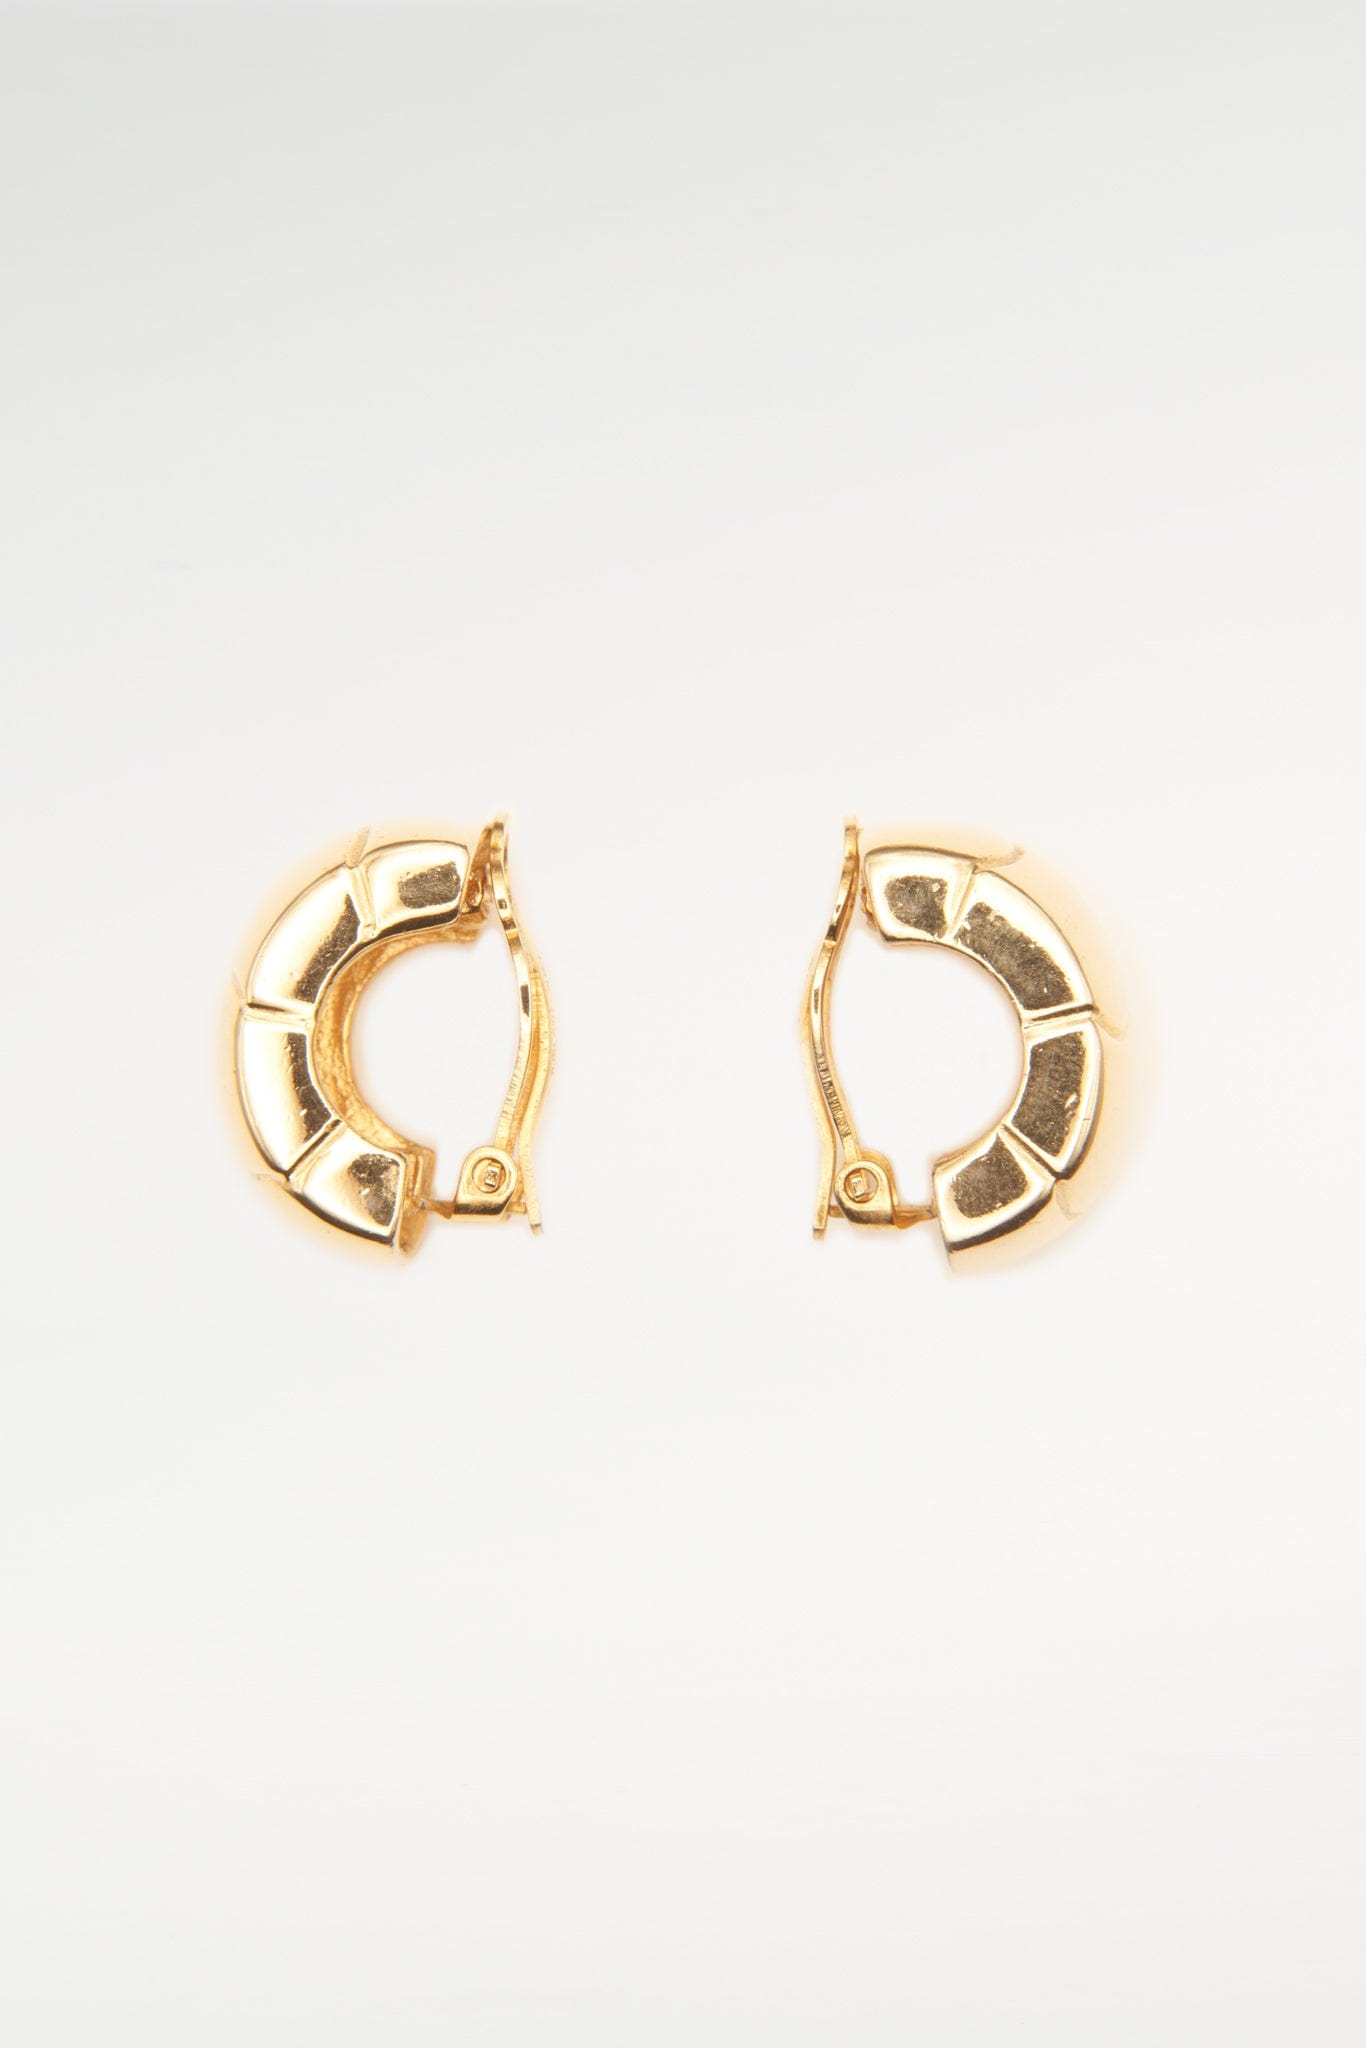 Vintage Gold Givenchy Hoop Earrings